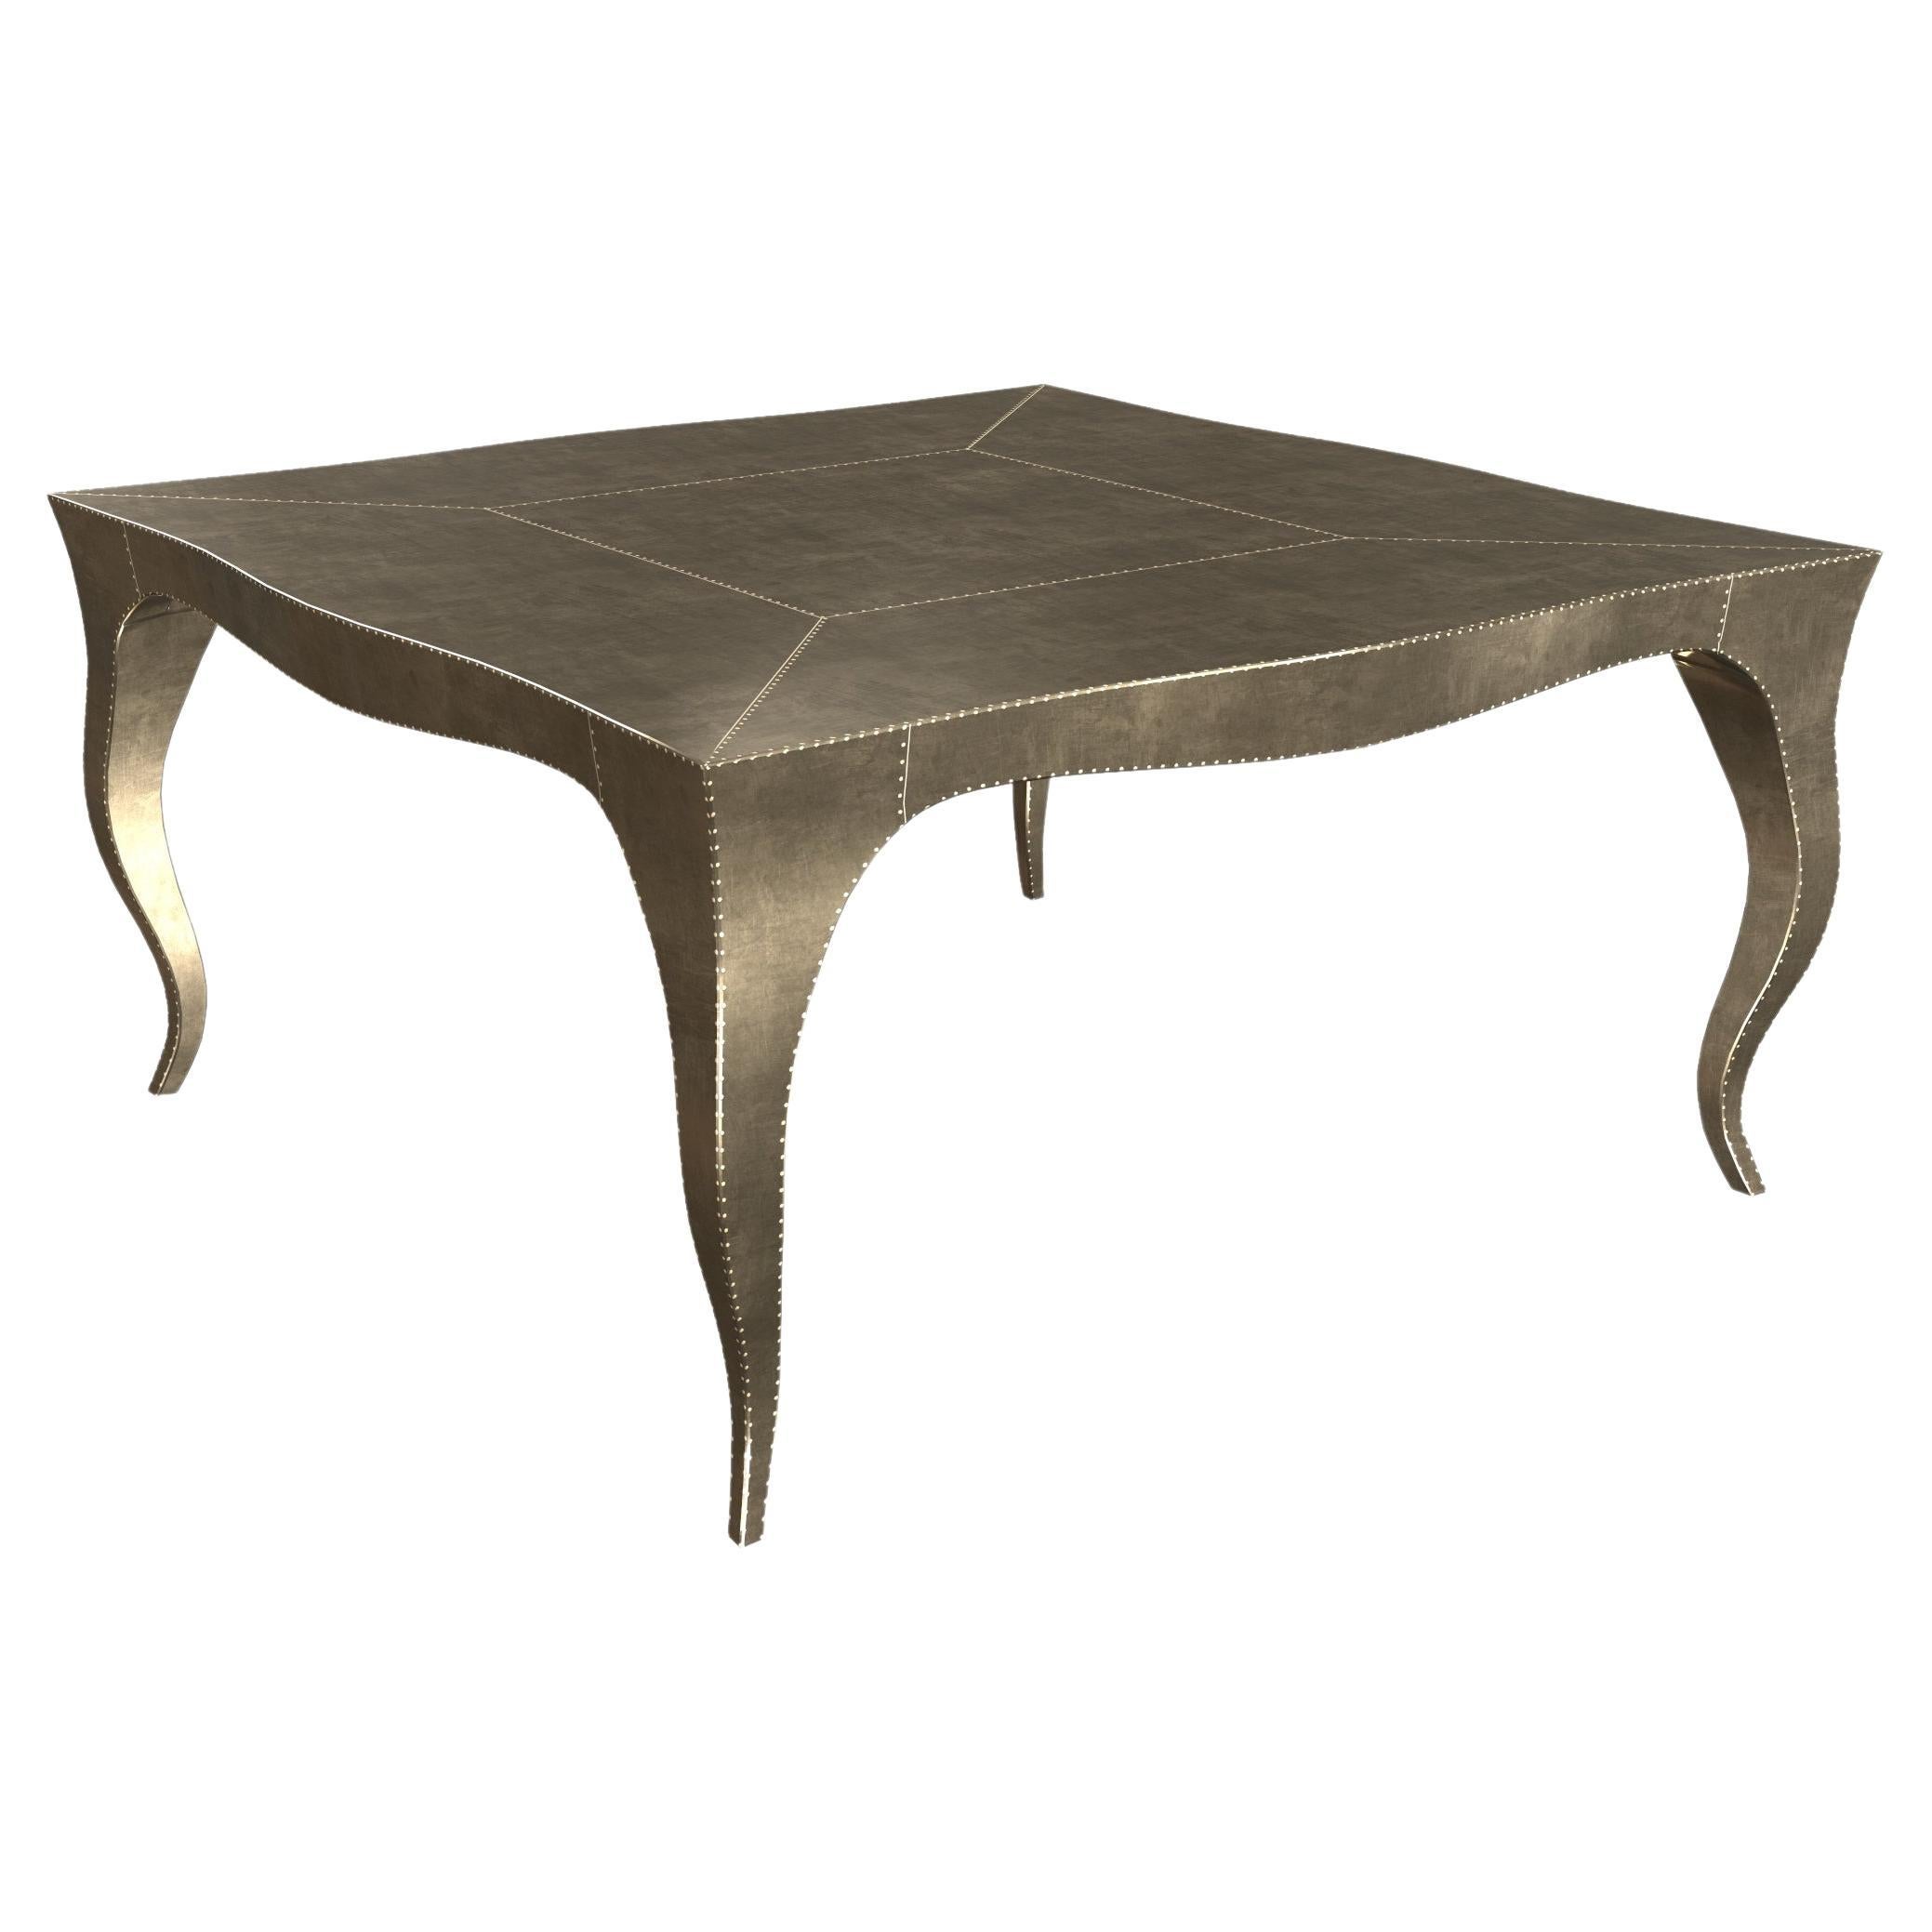 Louise Art Deco Nesting Tables Smooth Brass 18.5x18.5x10 inch by Paul M